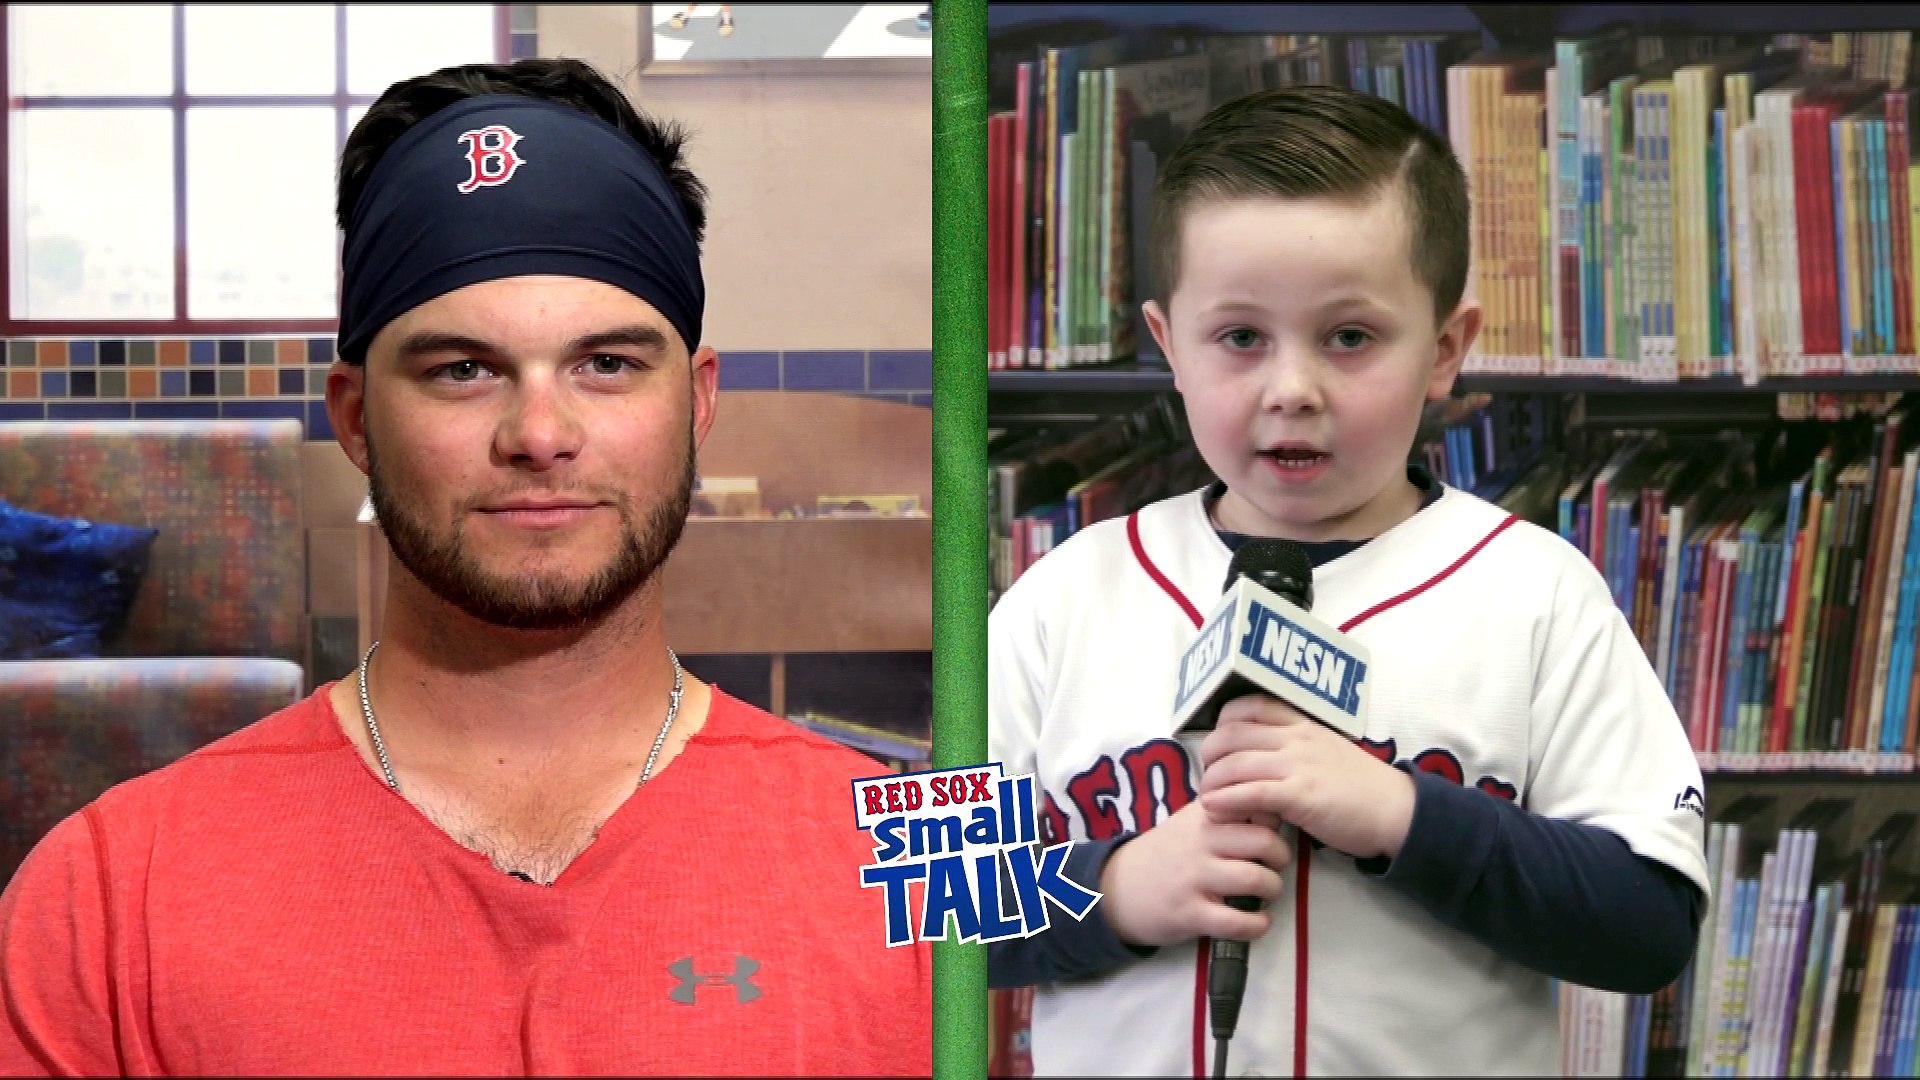 Red Sox Small Talk: Andrew Benintendi's Haircare Tips - video